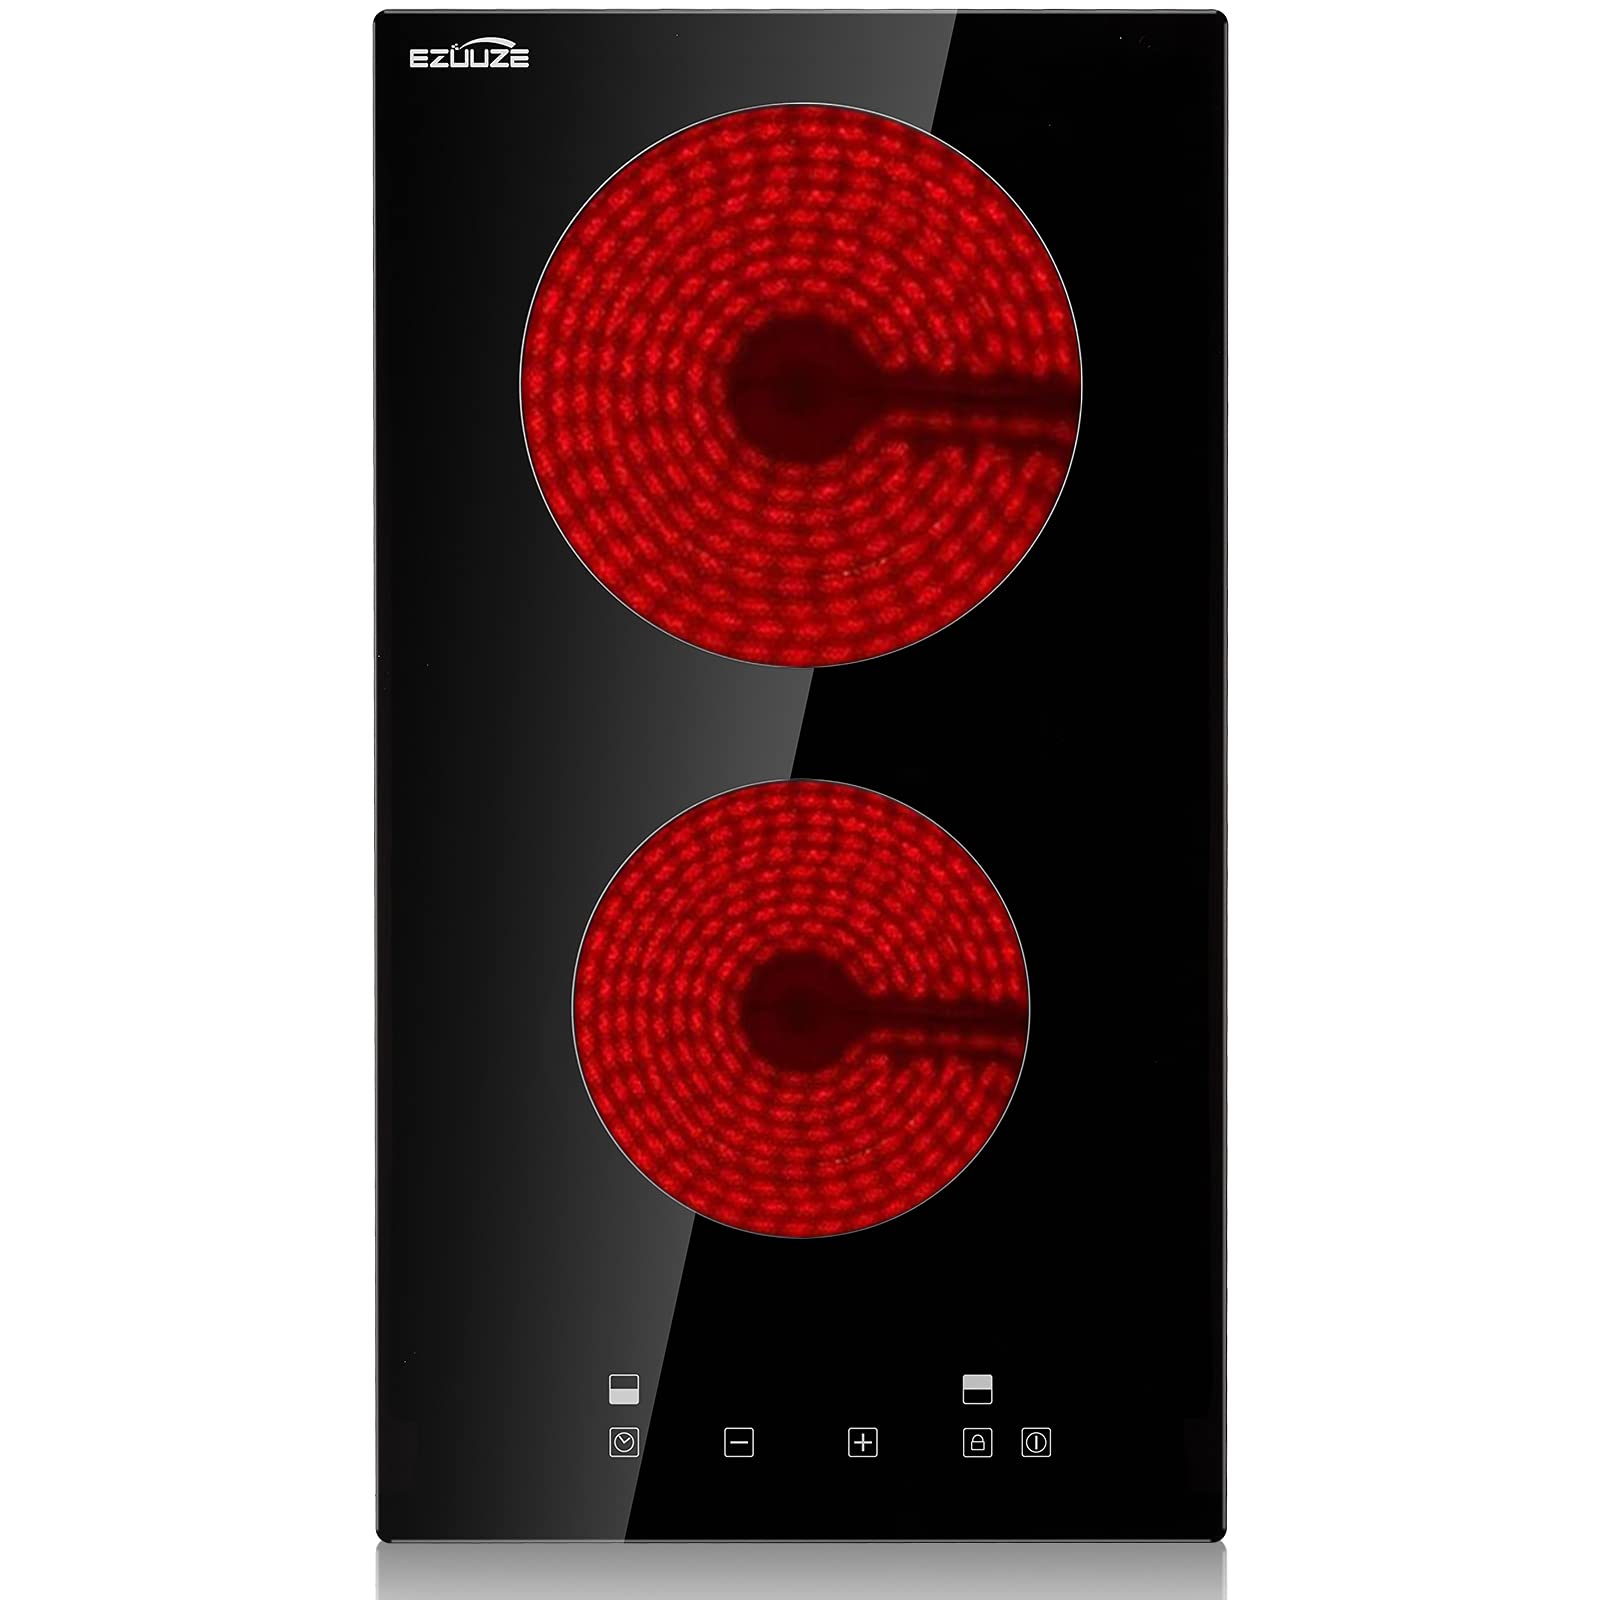 Electric Cooktop, EZUUZE 2 Burner Electric Cooktop,12 Inch Electric Stove Built in, Safety lock, 9 Heating Level, Residual Heat Warning, Sensor Touch Control, 240V Ceramic Cooktop